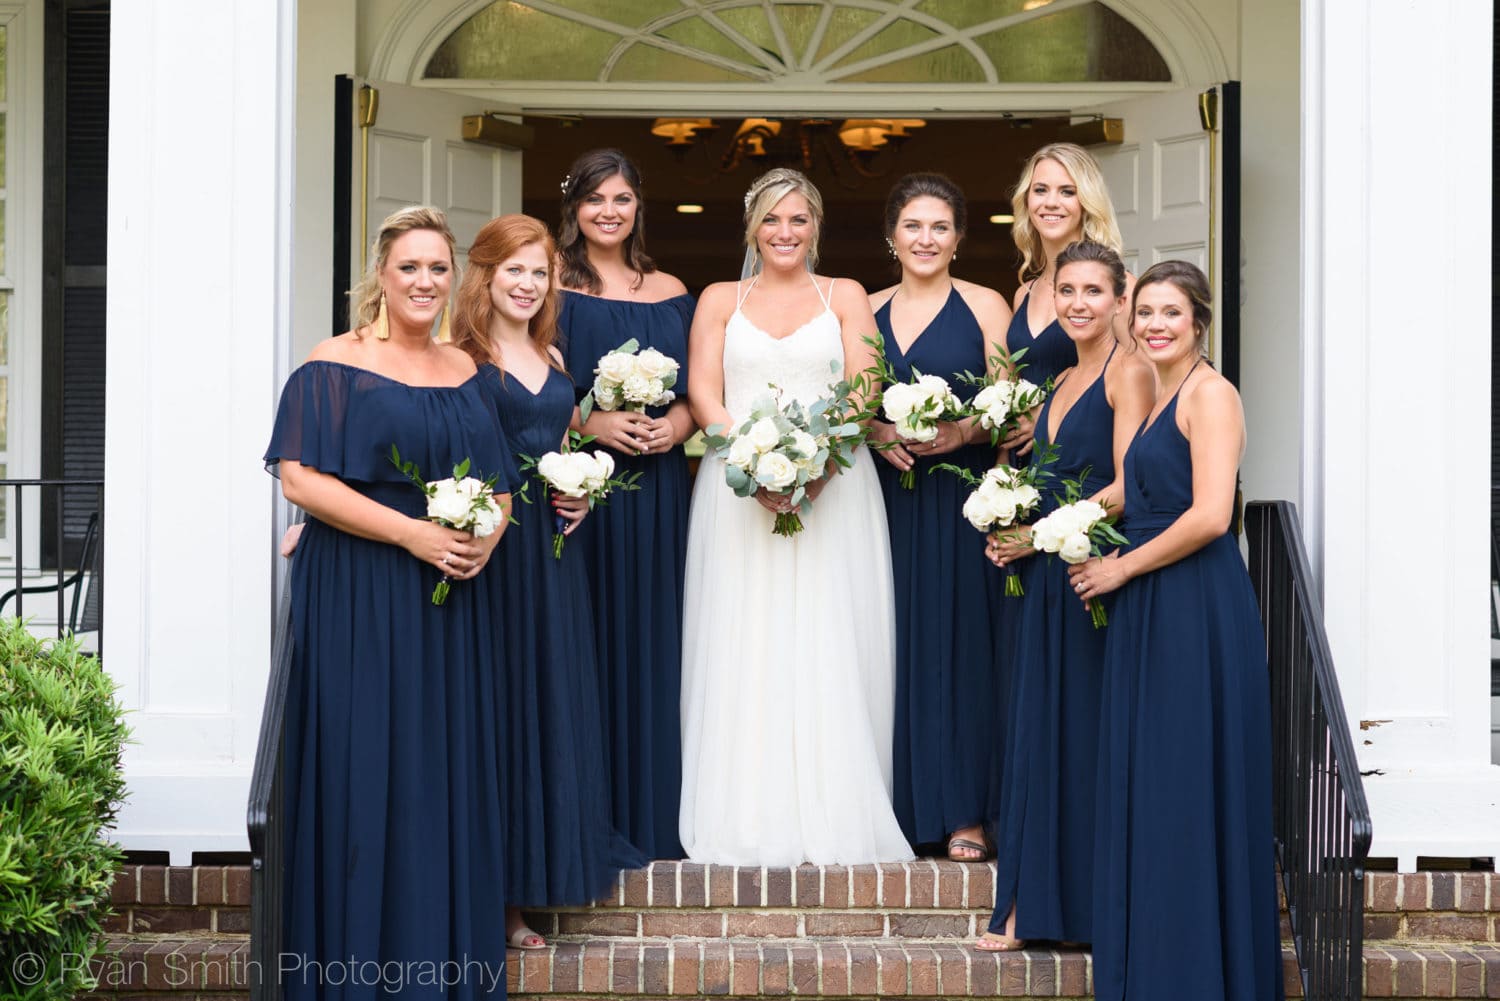 Bridesmaids standing together before the ceremony - Pawleys Plantation